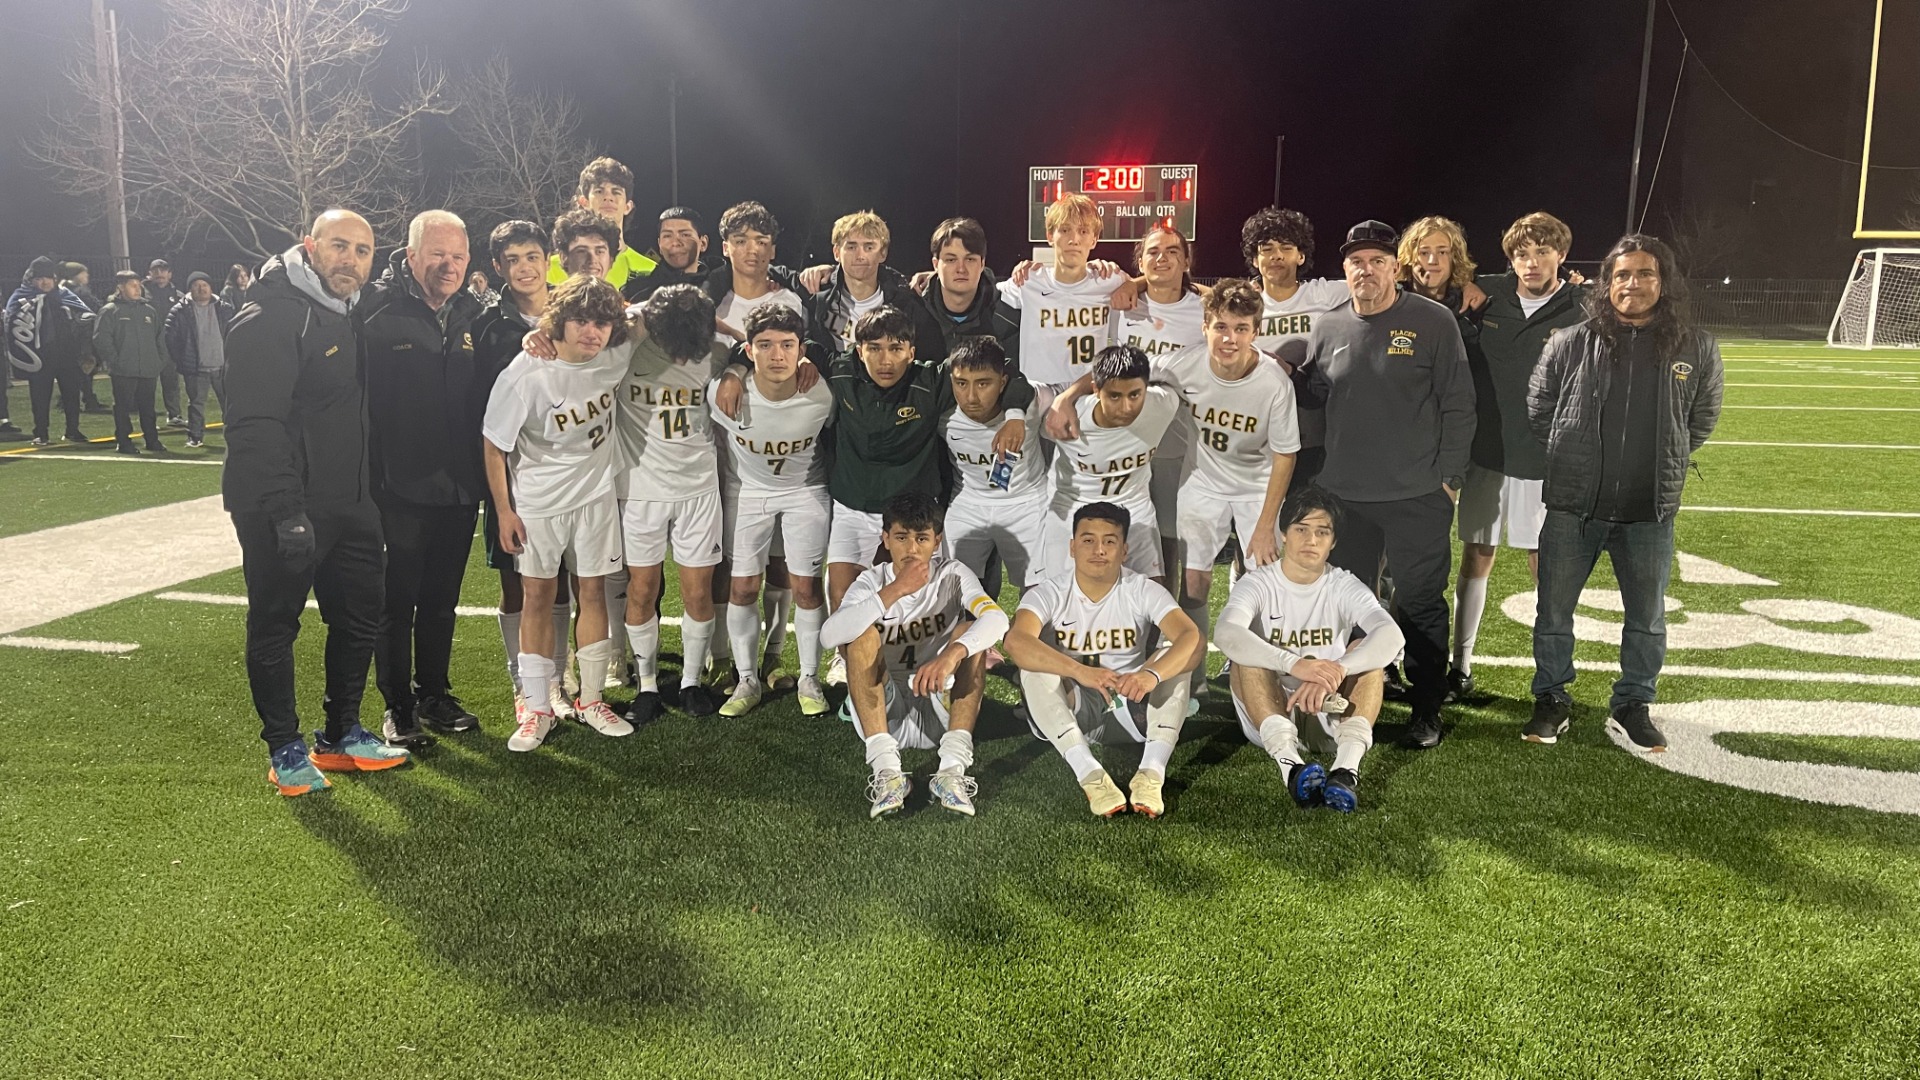 Slide 6 - Congratulations to our 2024 Boys soccer team on a great season!